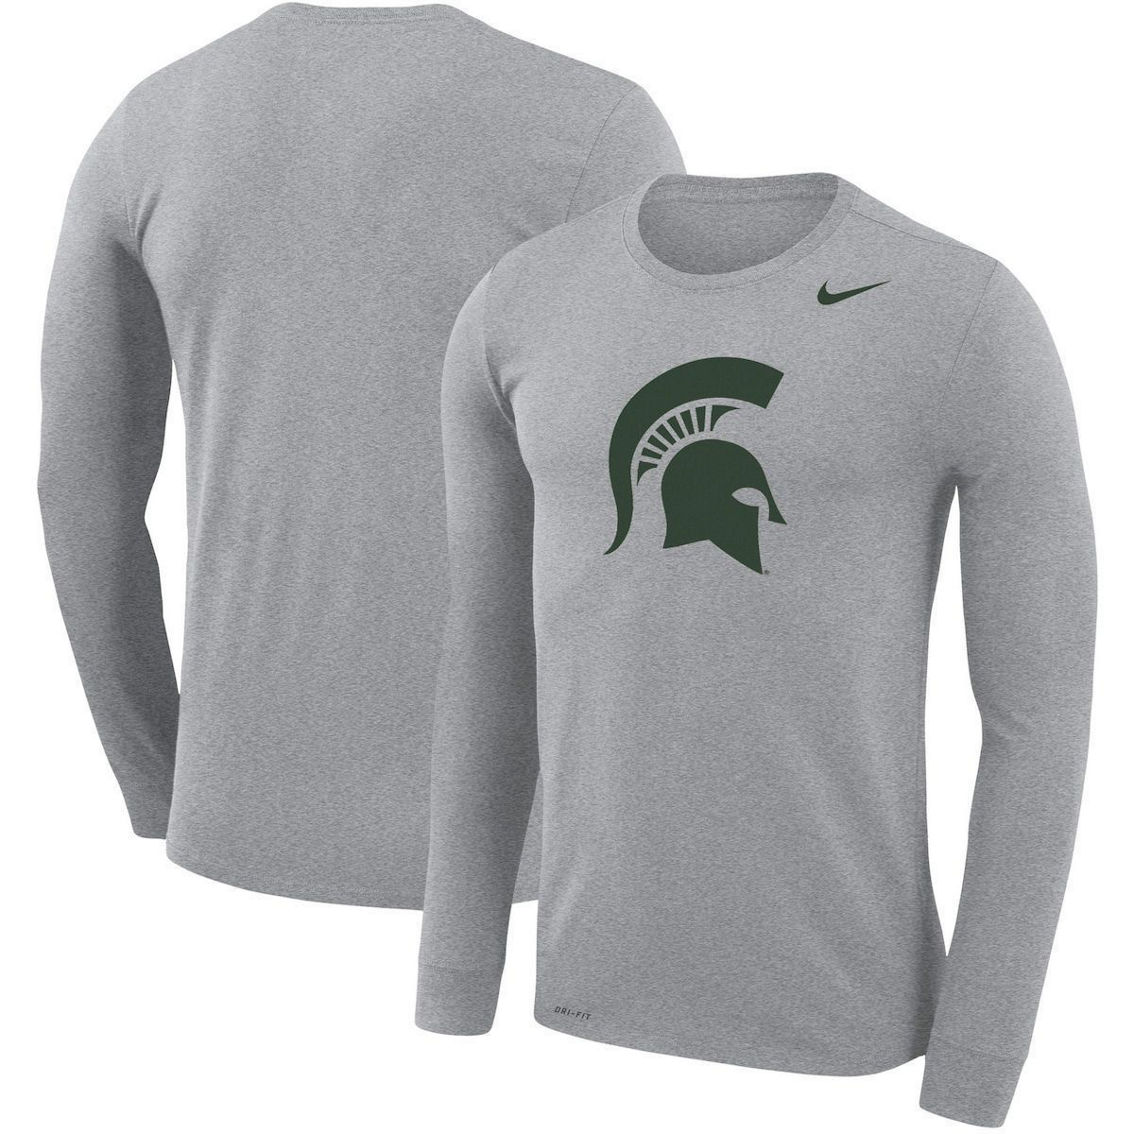 Nike Men's Heather Gray Michigan State Spartans Legend Wordmark Performance Long Sleeve T-Shirt - Image 2 of 4